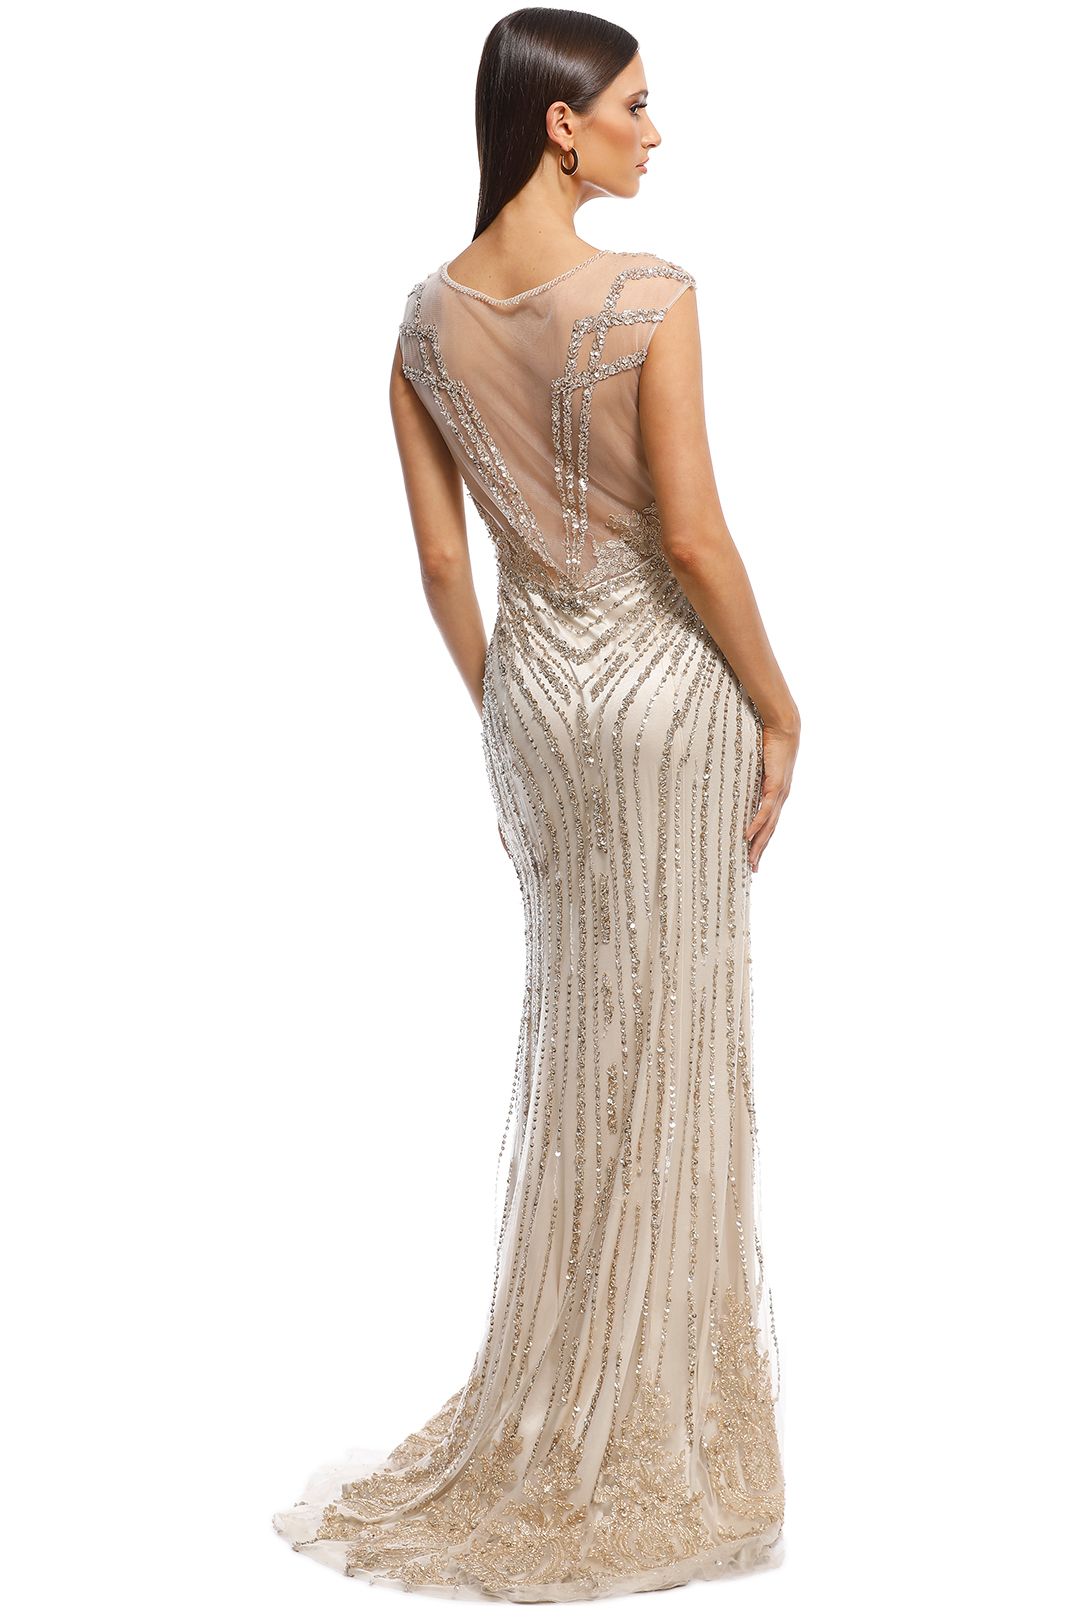 Tinaholy - Angelina Sequin Gown - Gold - Back